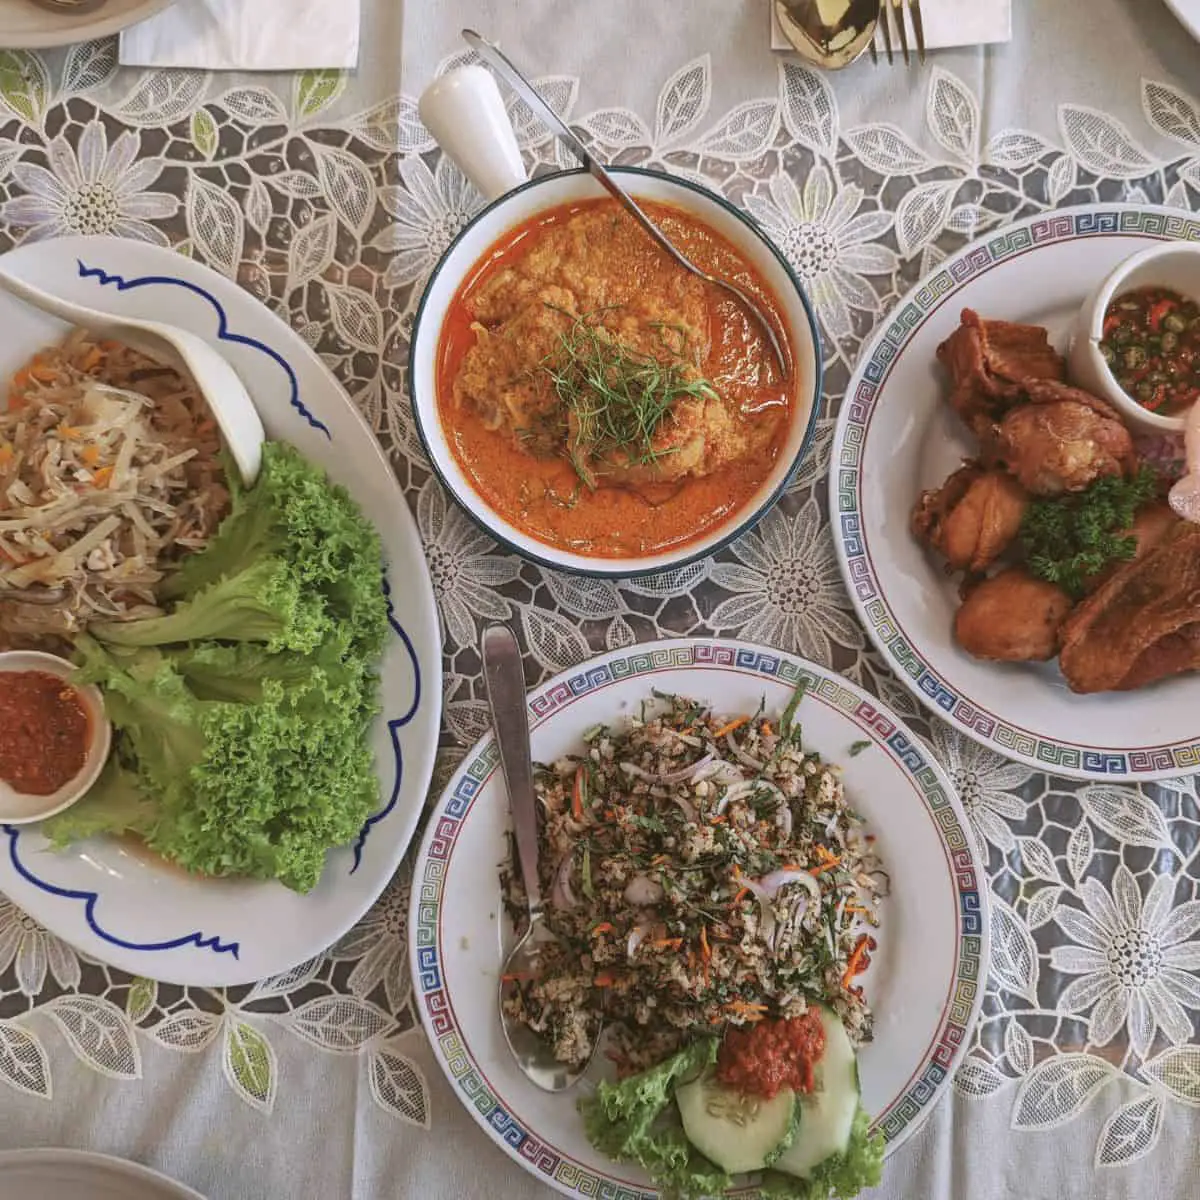 Auntie Gaik Leans platter of food Penang 3 day itinerary